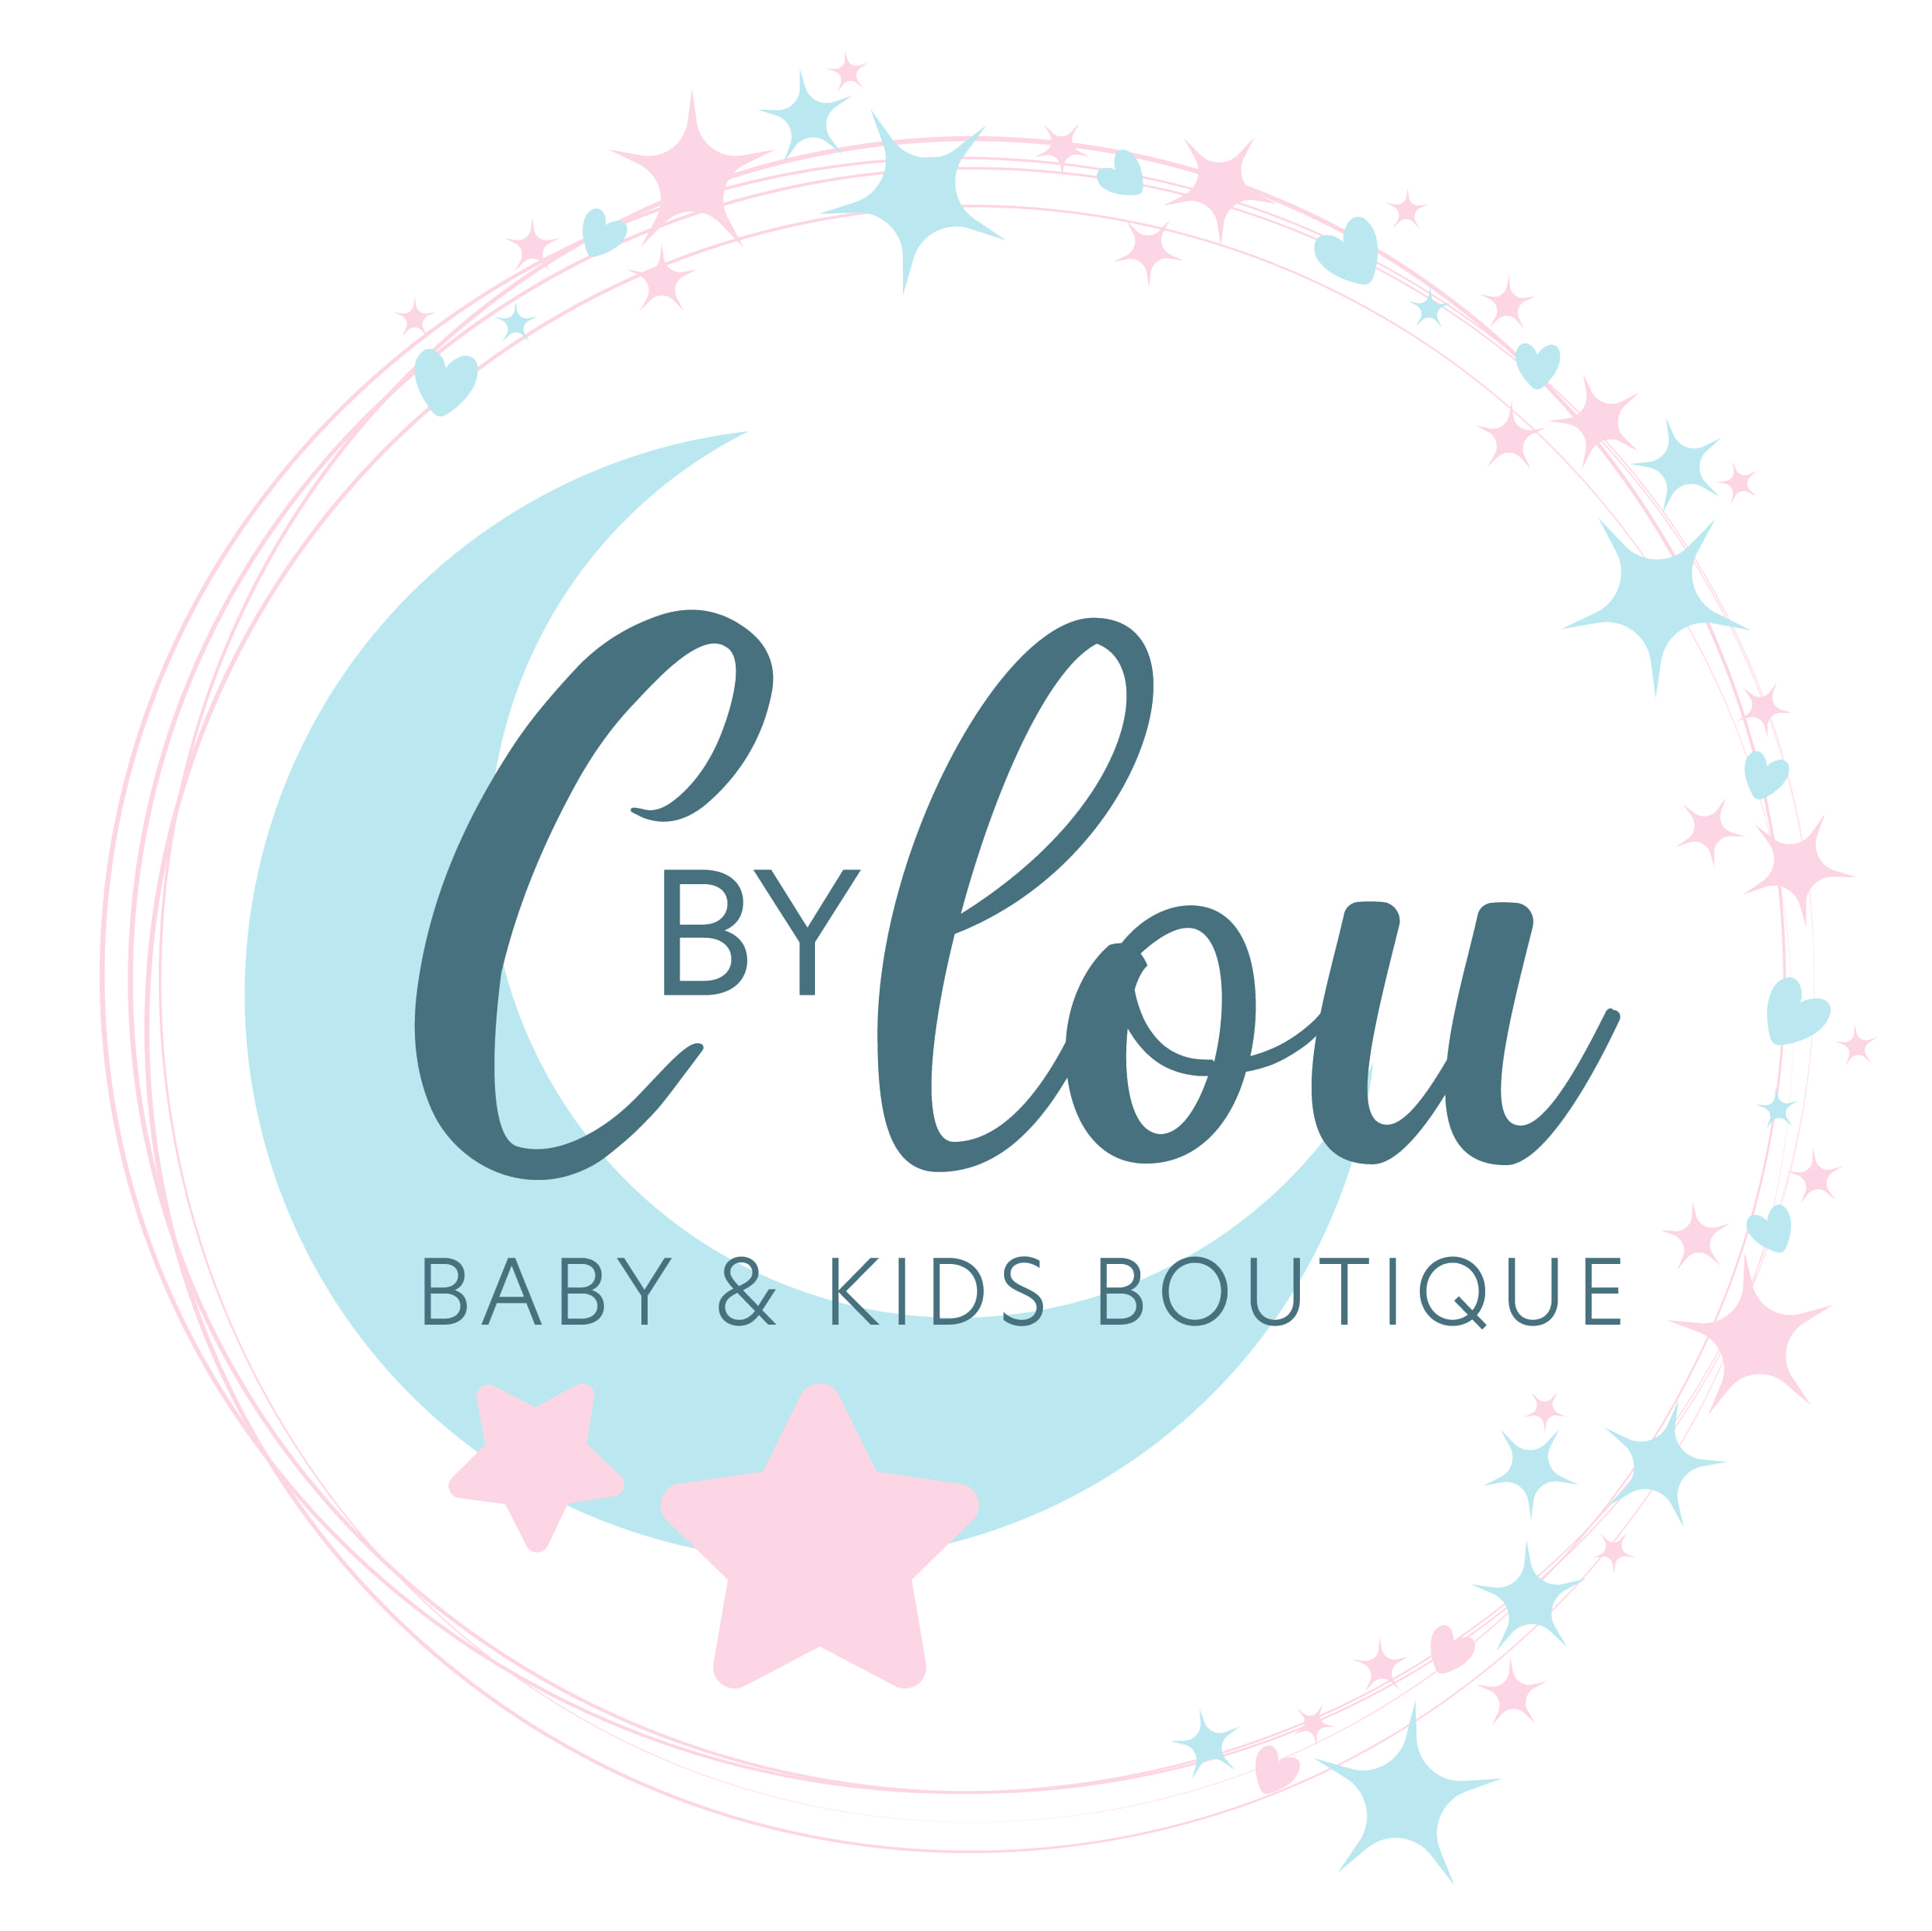 C by Lou baby & kids boutique